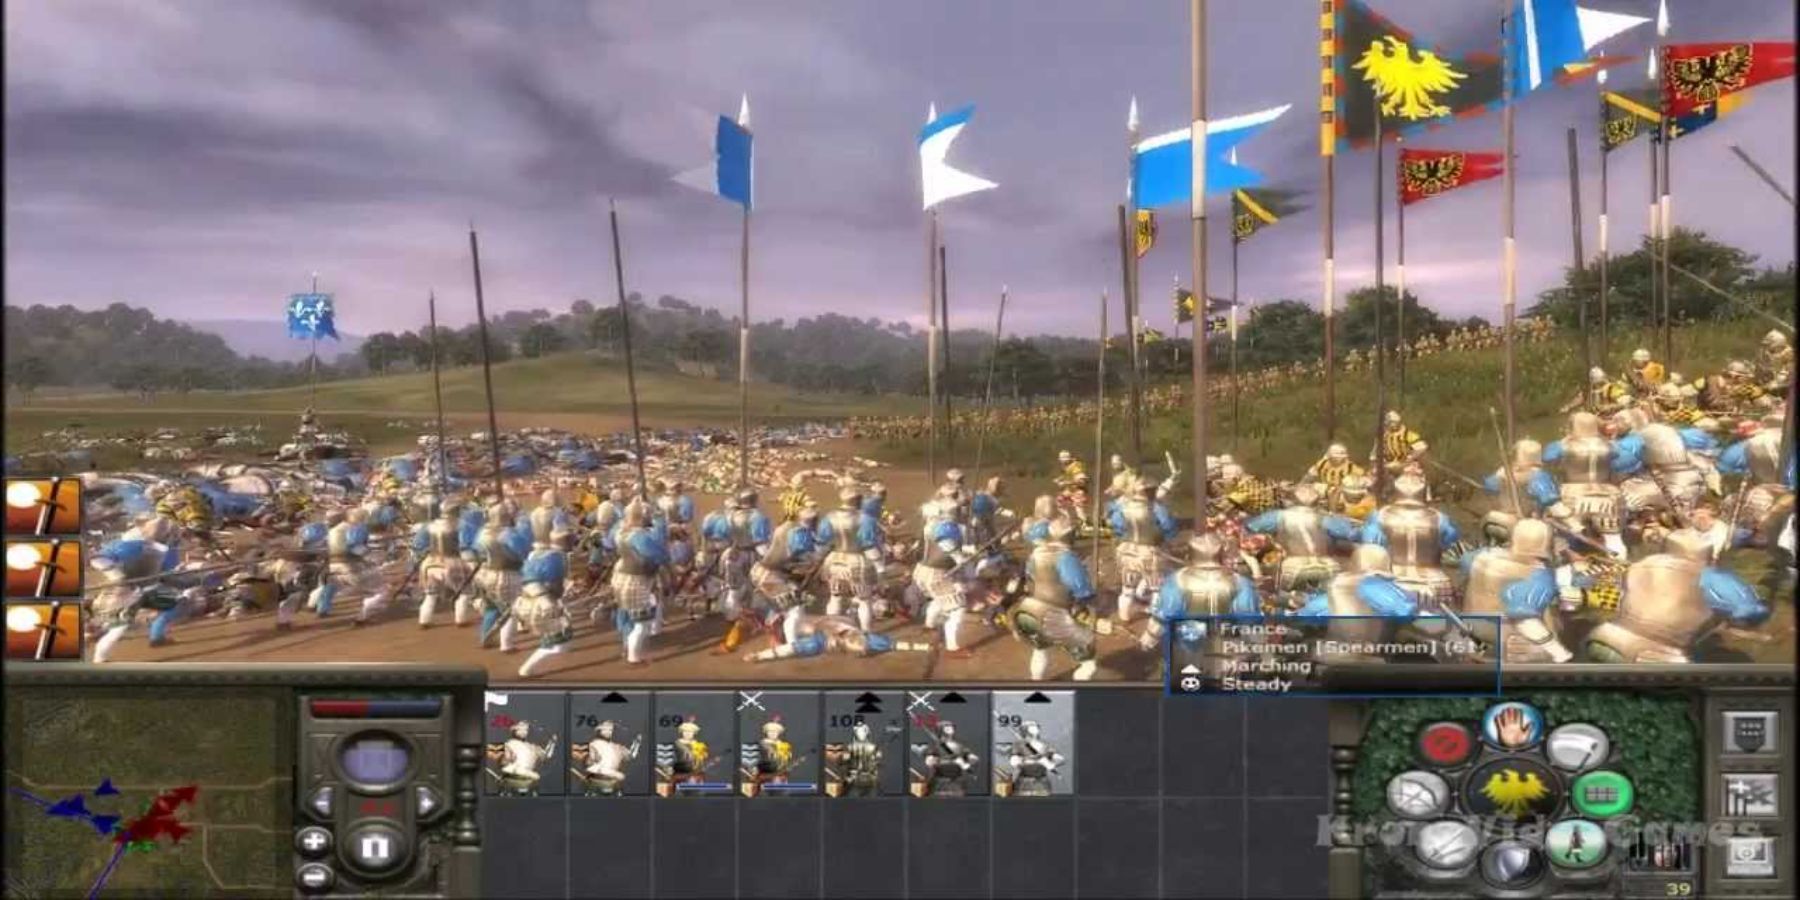 French pikemen about to clash against an opposing army